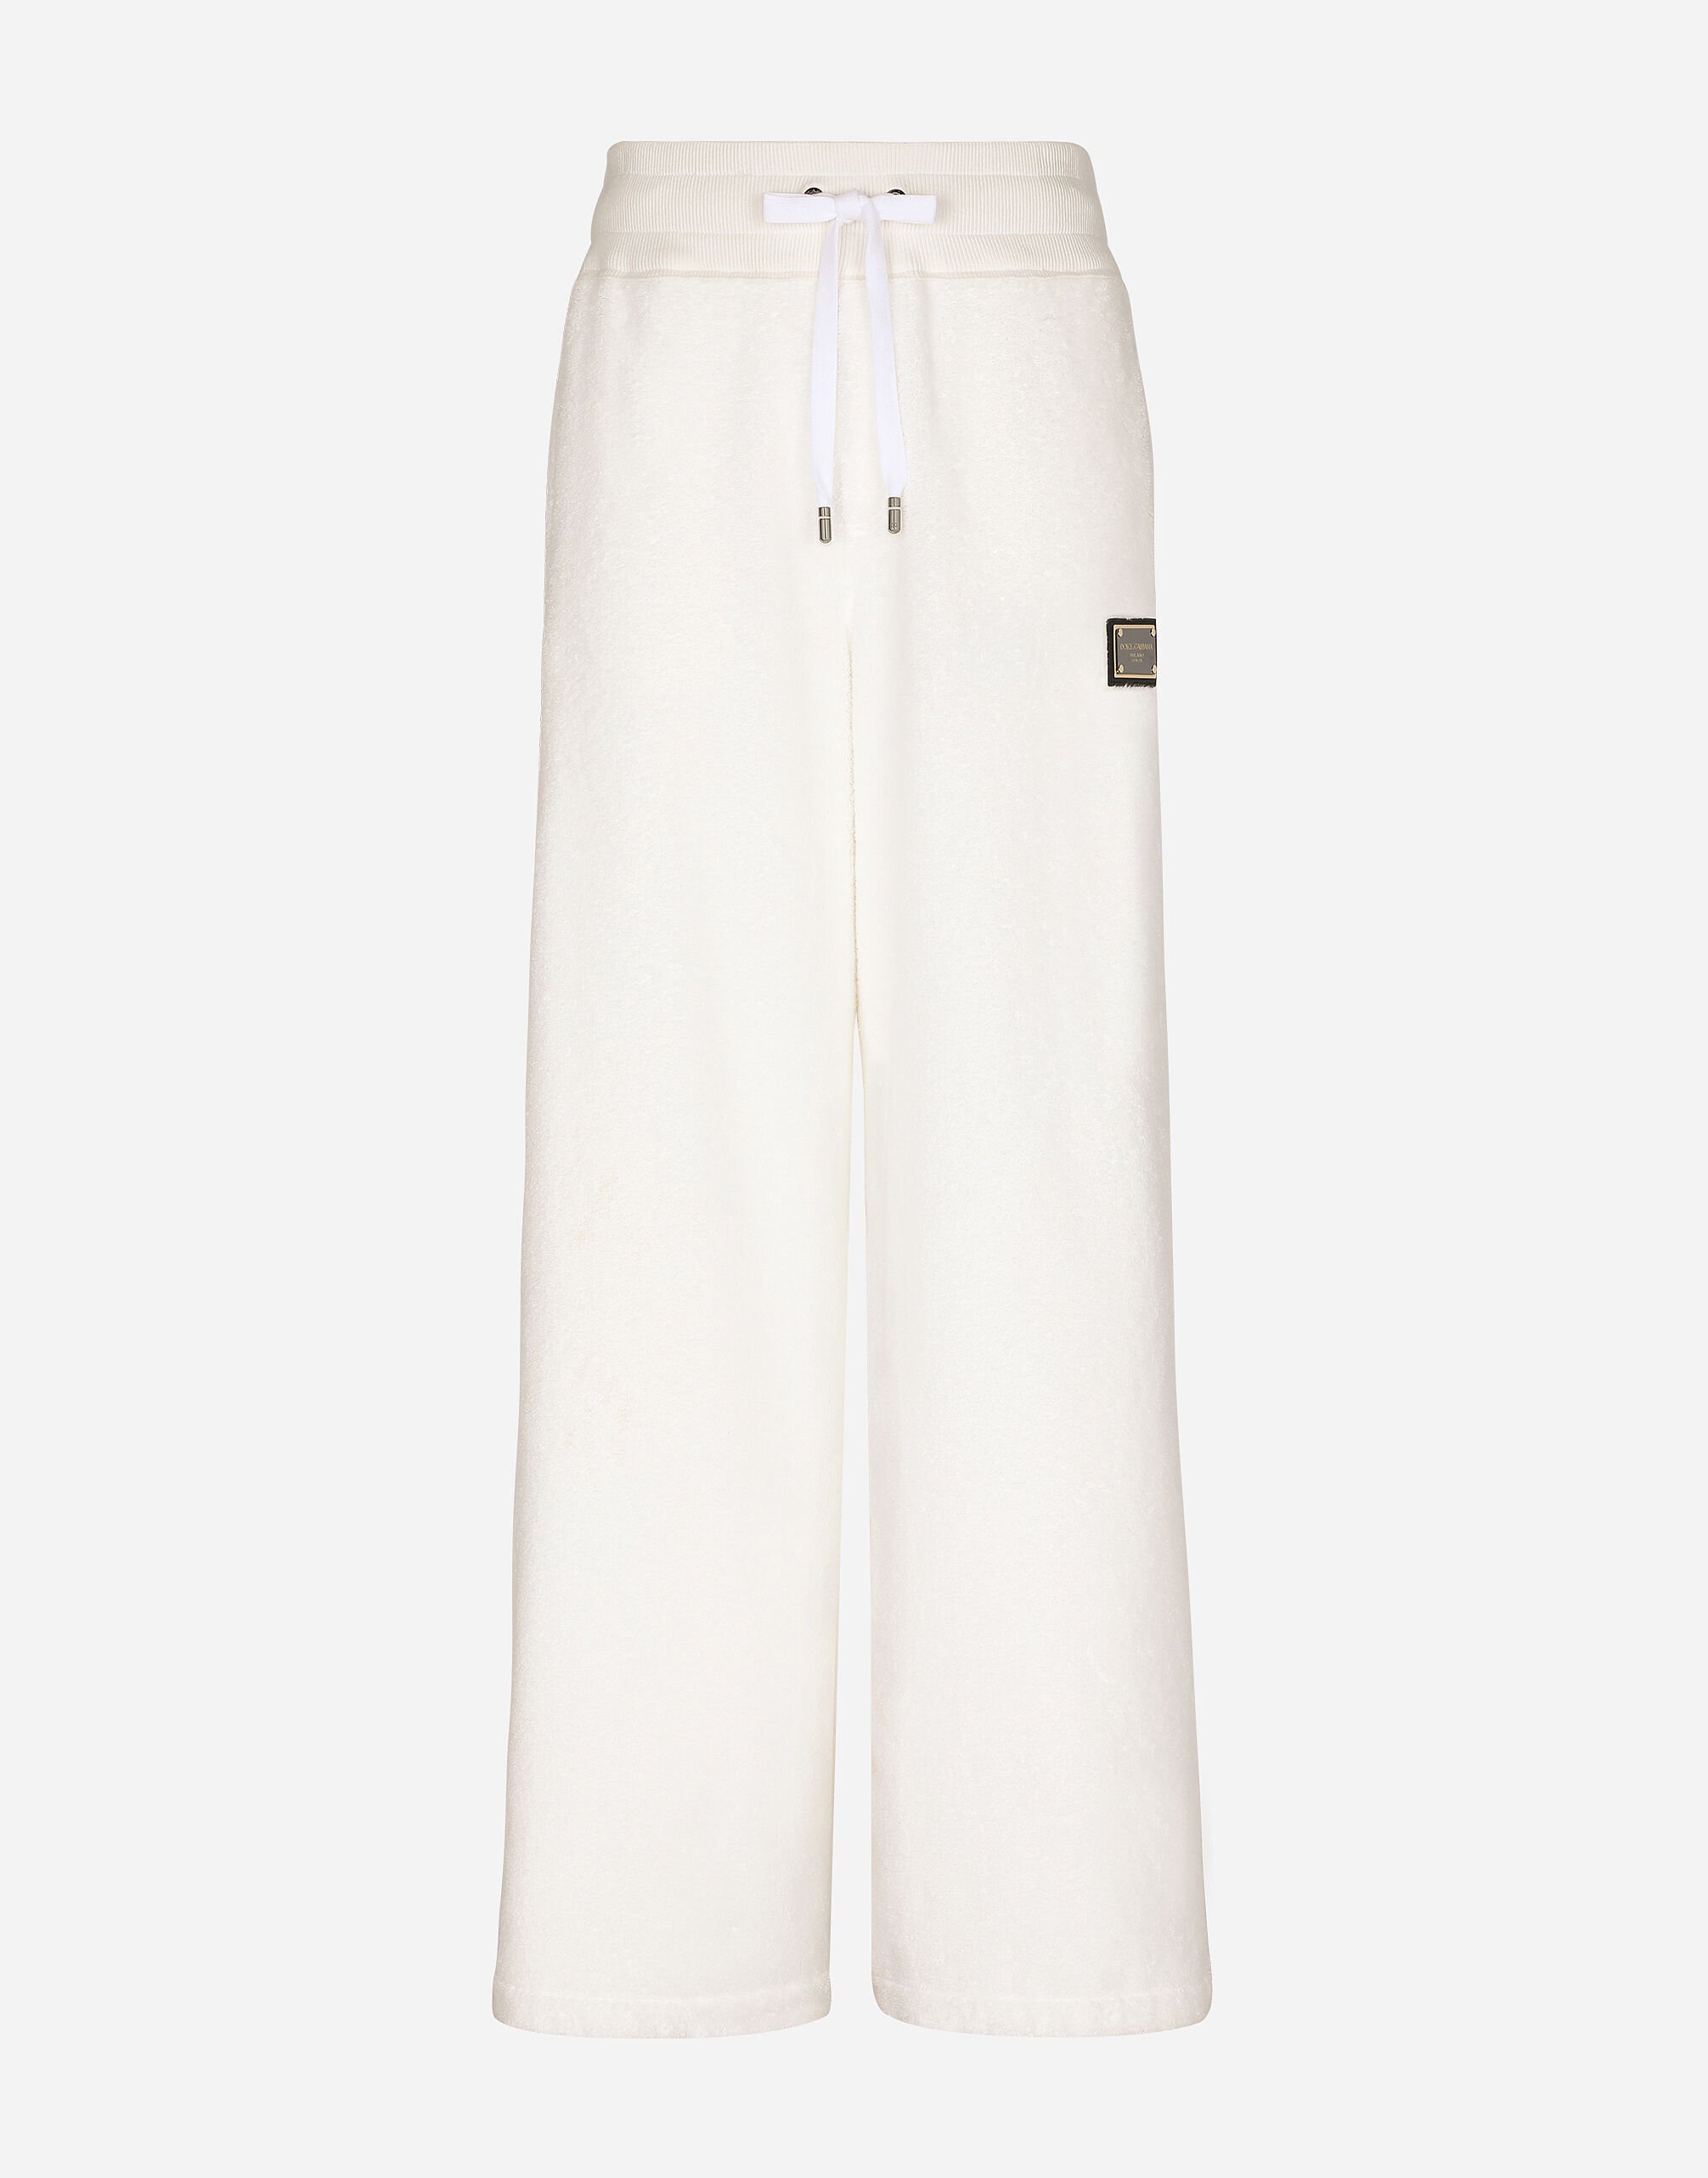 Dolce&Gabbana Terrycloth jogging pants with logo tag White GY6IETFUFJR